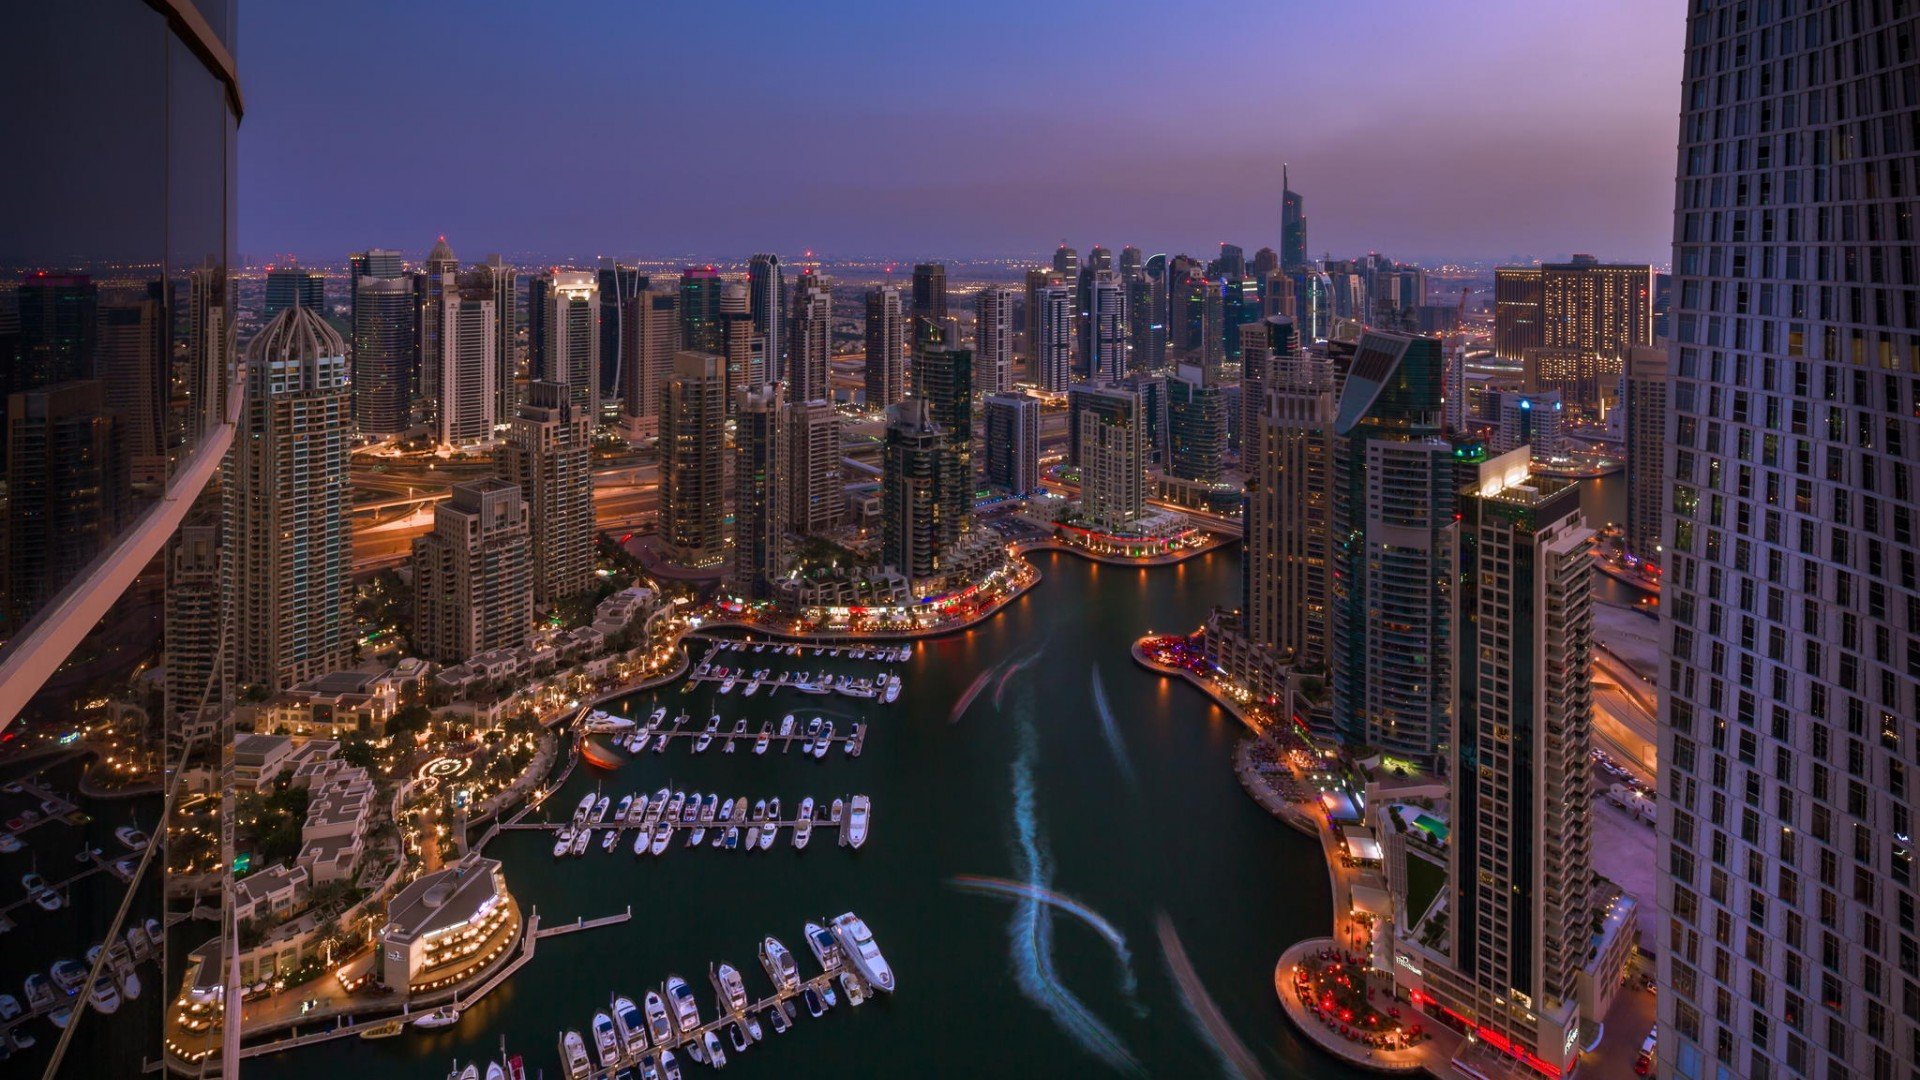 Download 1080p Dubai PC background ID:485104 for free